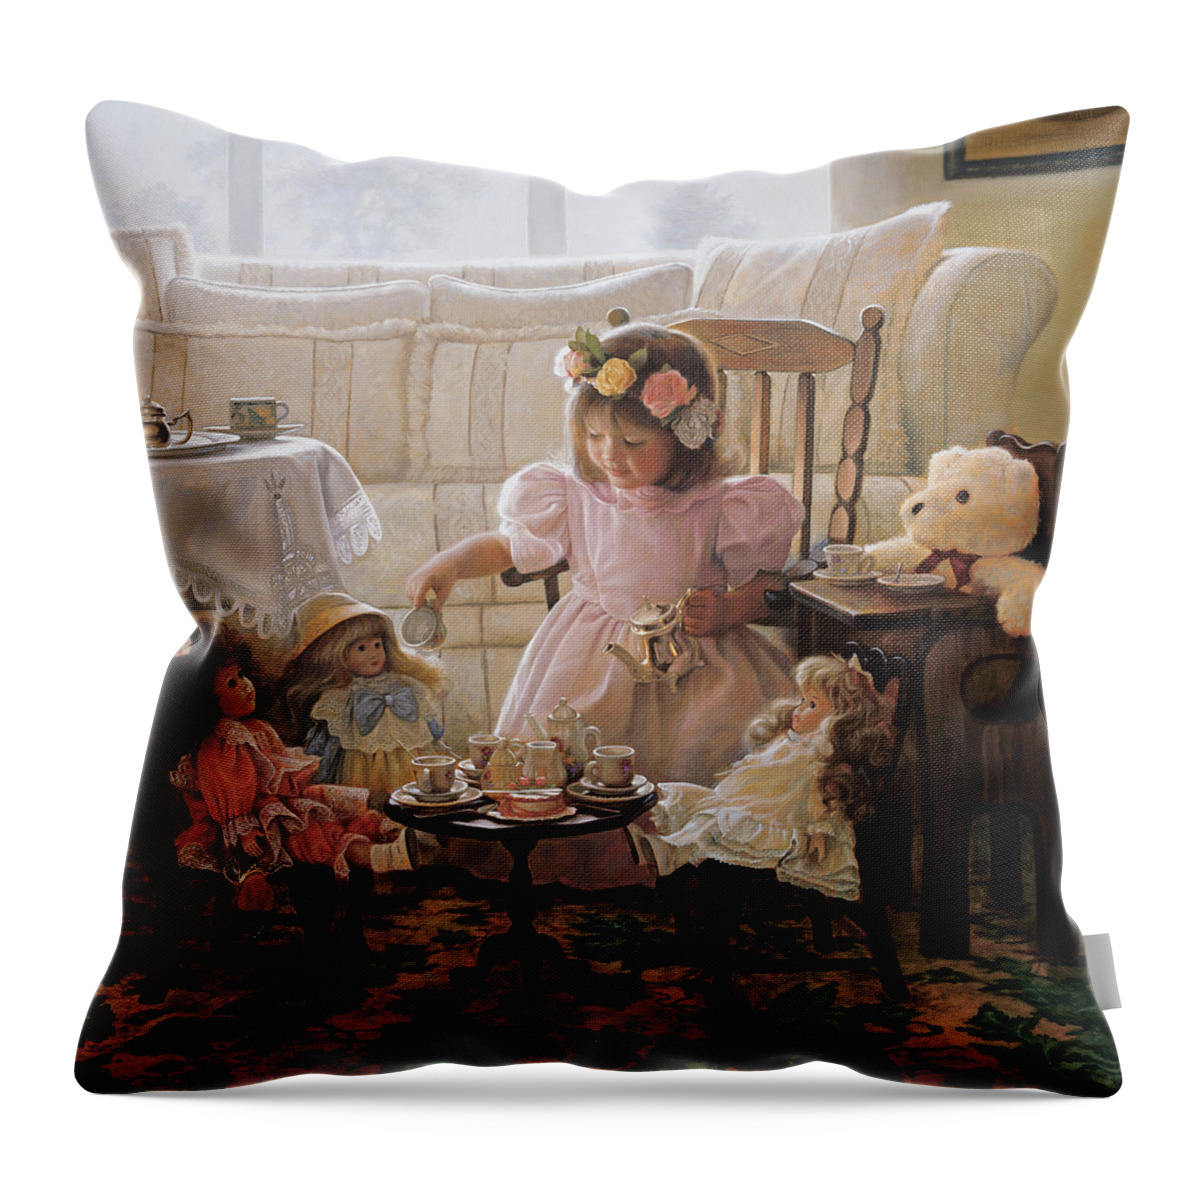 Girl Throw Pillow featuring the painting Cream and Sugar by Greg Olsen